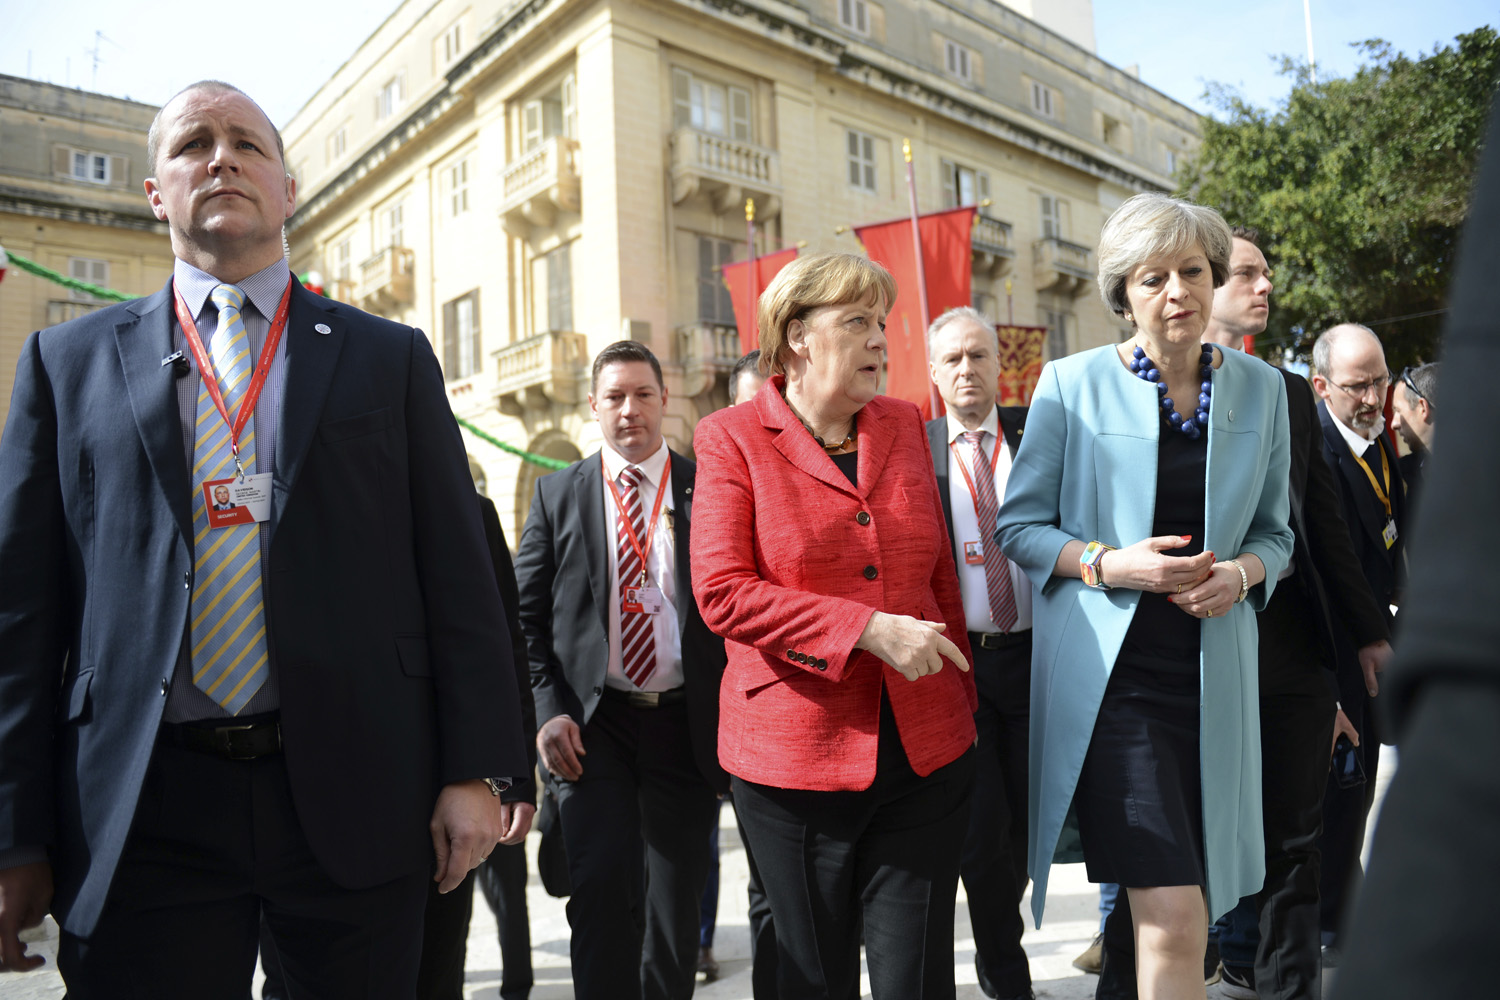 German Chancellor Angela Merkel, center, speaks with British Prime Minister Theresa May, right, as they walk with other EU leaders during an event at an EU summit in Valletta, Malta.(Rene Rossignaud/AP)